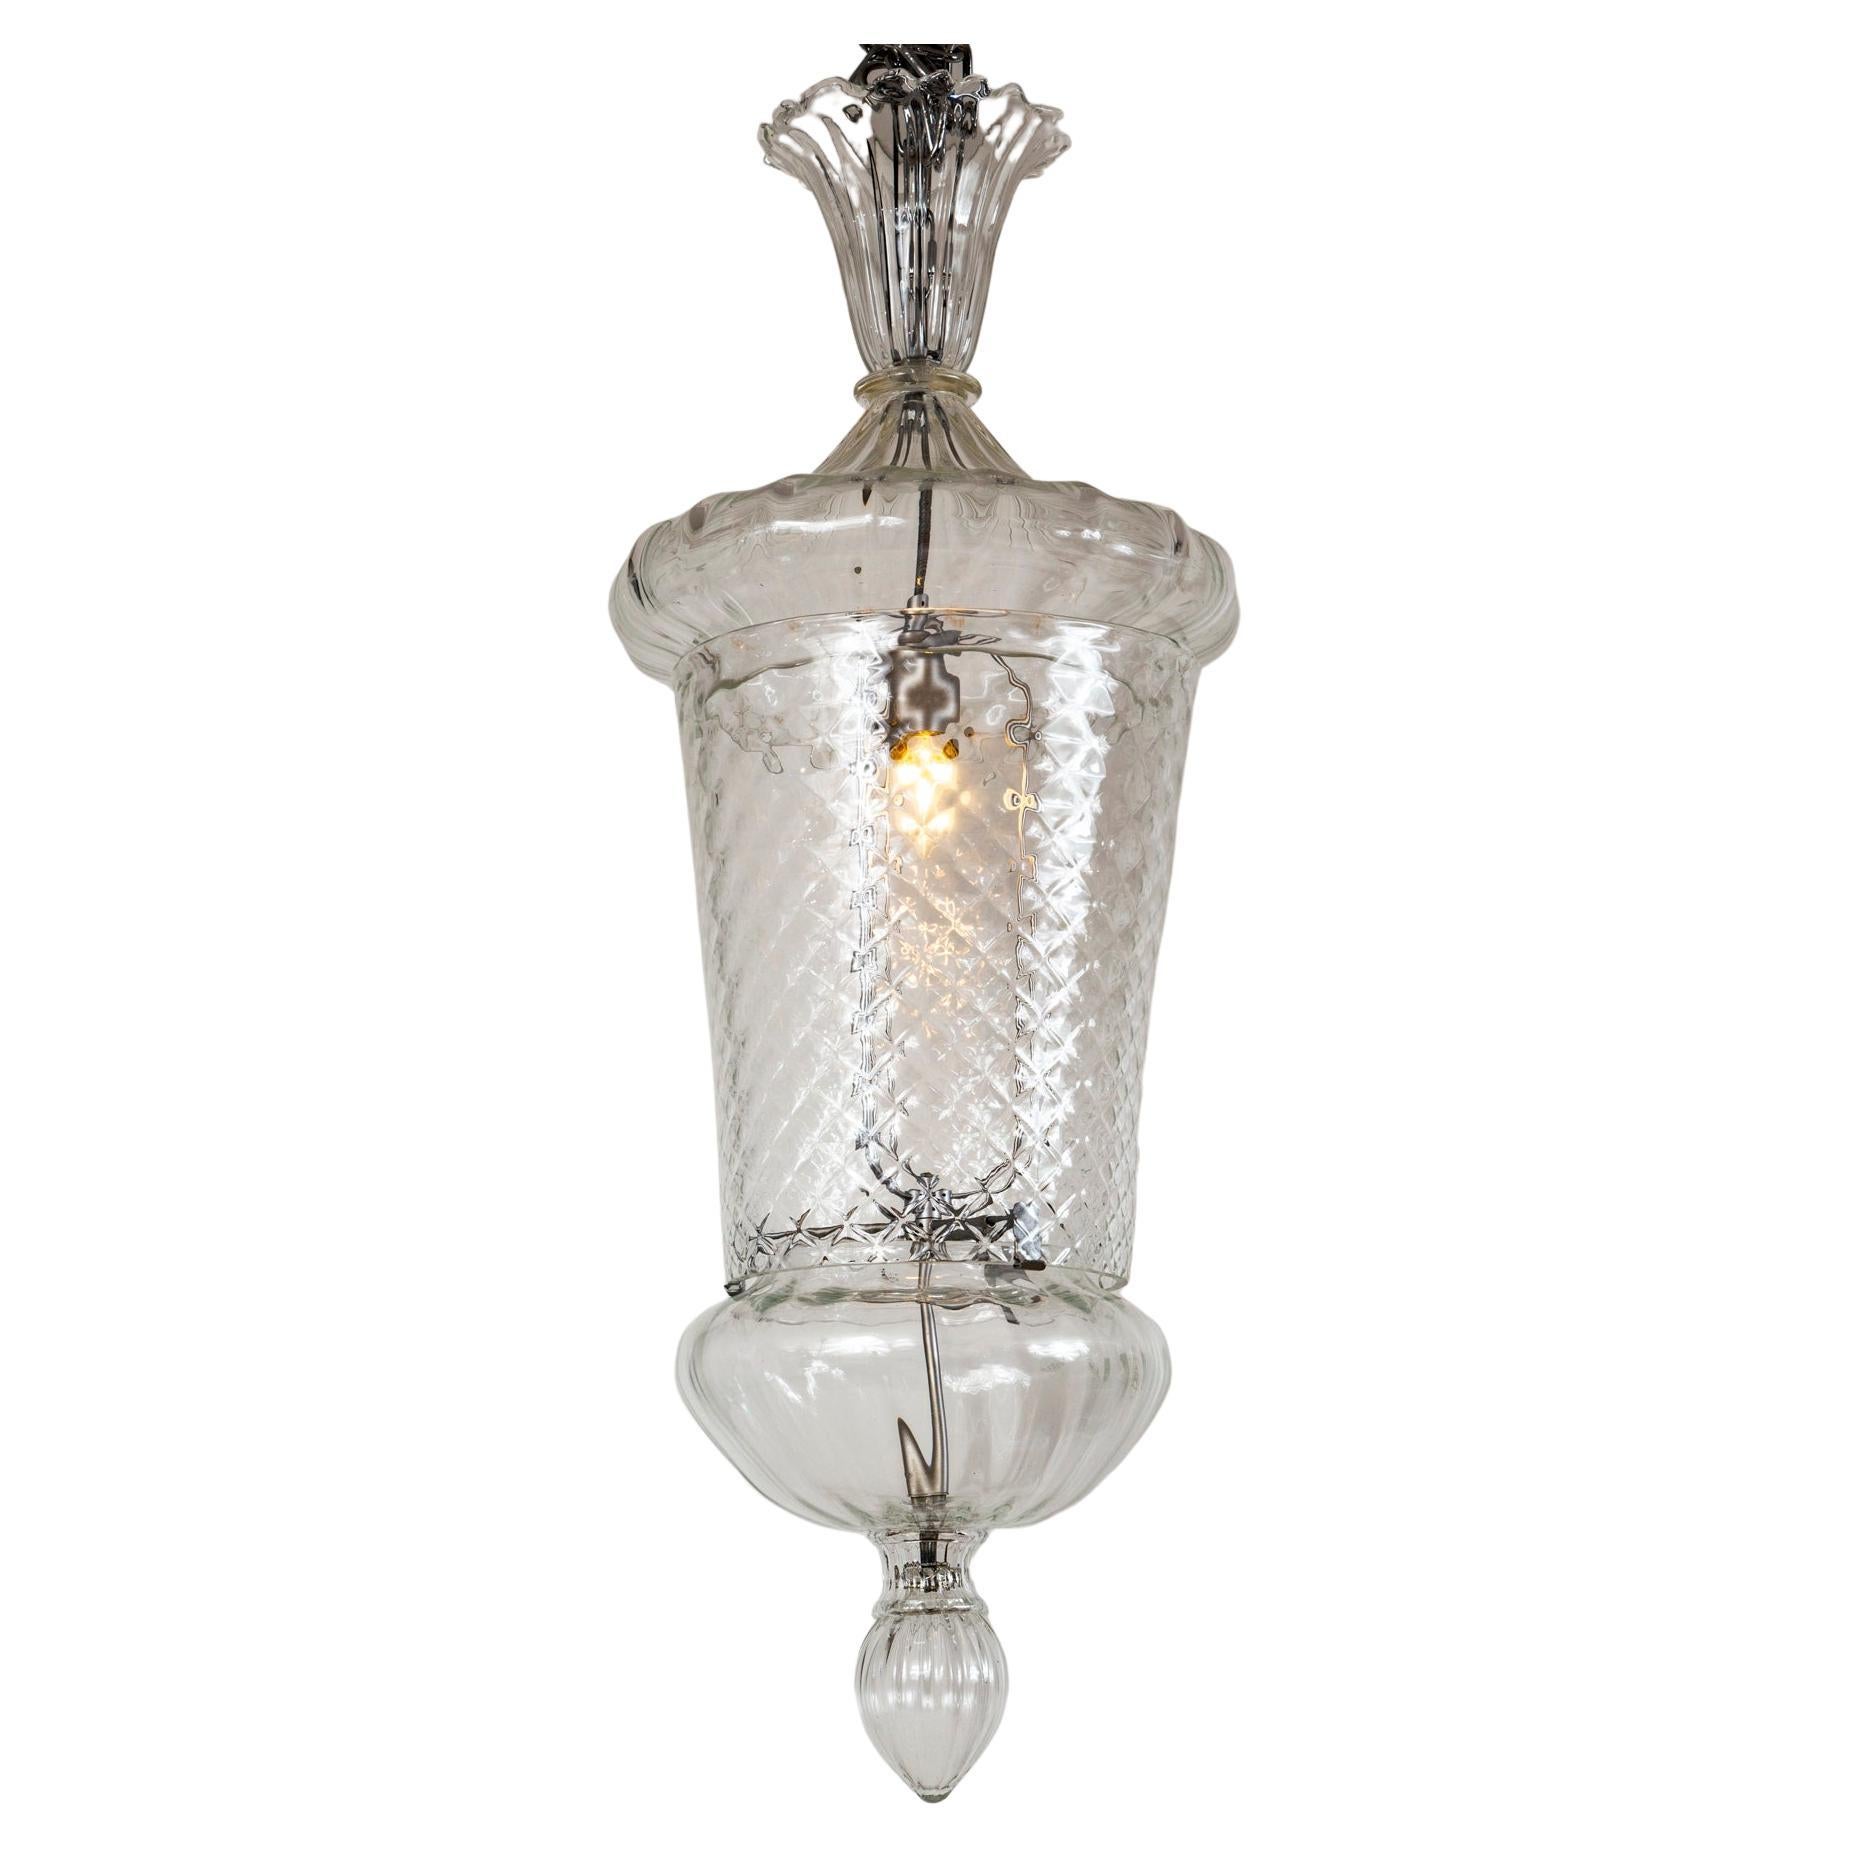 A very beautiful pair of large crystal clear Venetian  lanterns composed of six seperately blown pieces.  Tapered cylindrical body blown in a textured diamond shaped pattern.

Dating: Old Stock 1970ca

Origin: Murano, Italy

Condition: